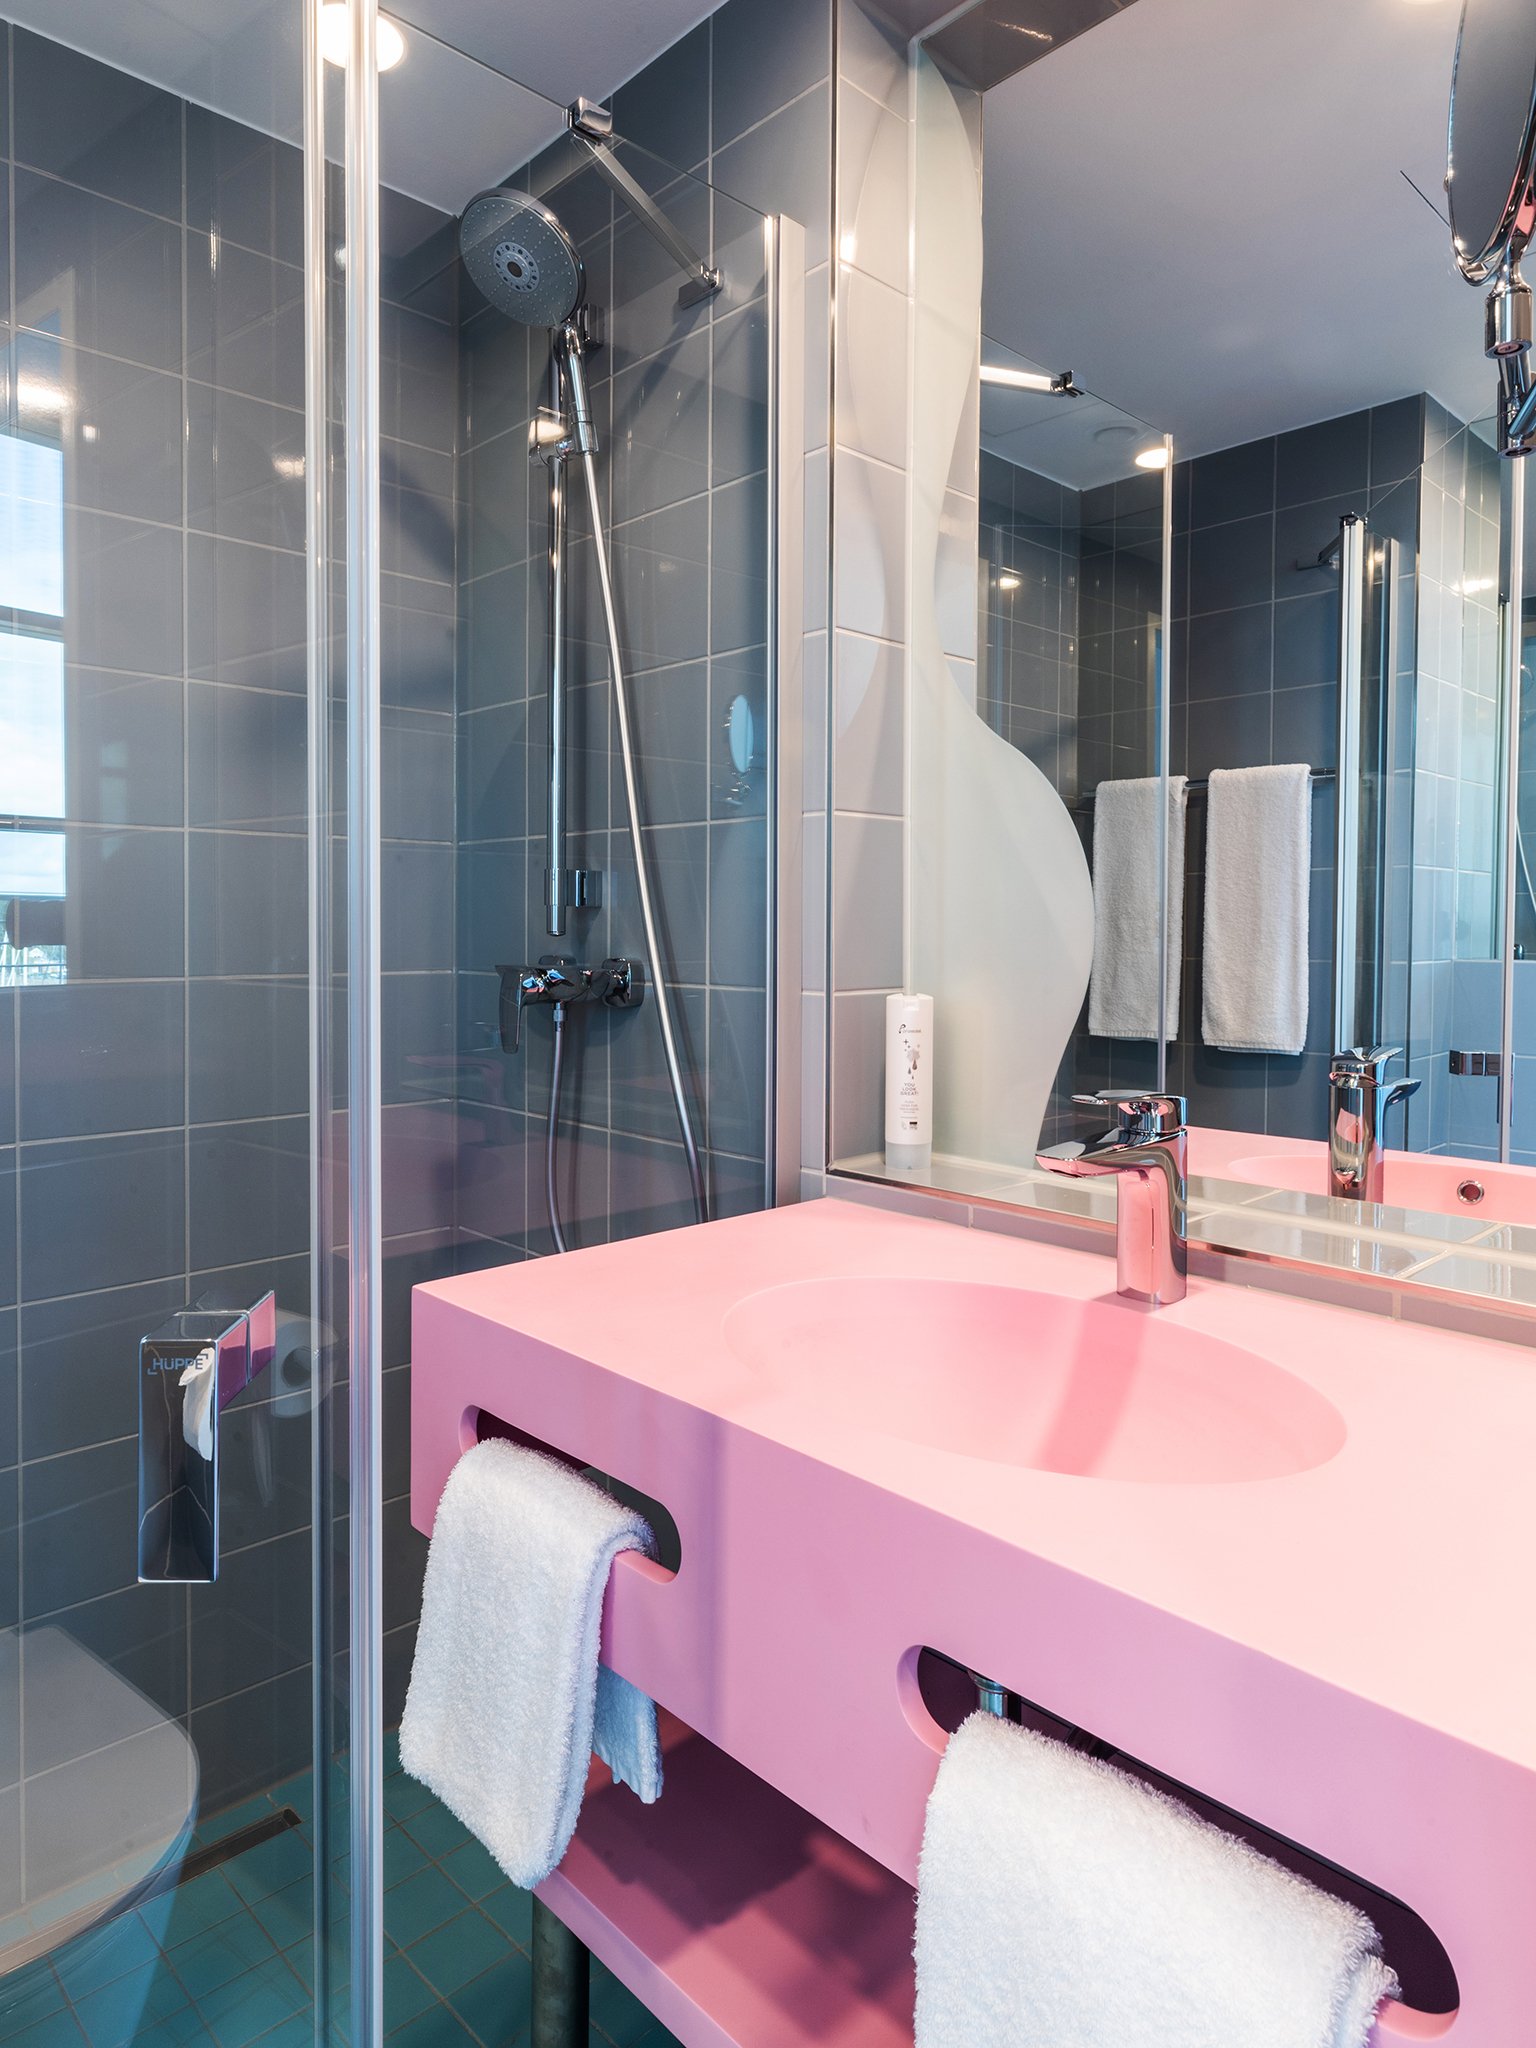 The pink bathroom of the prizeotel in Rostock